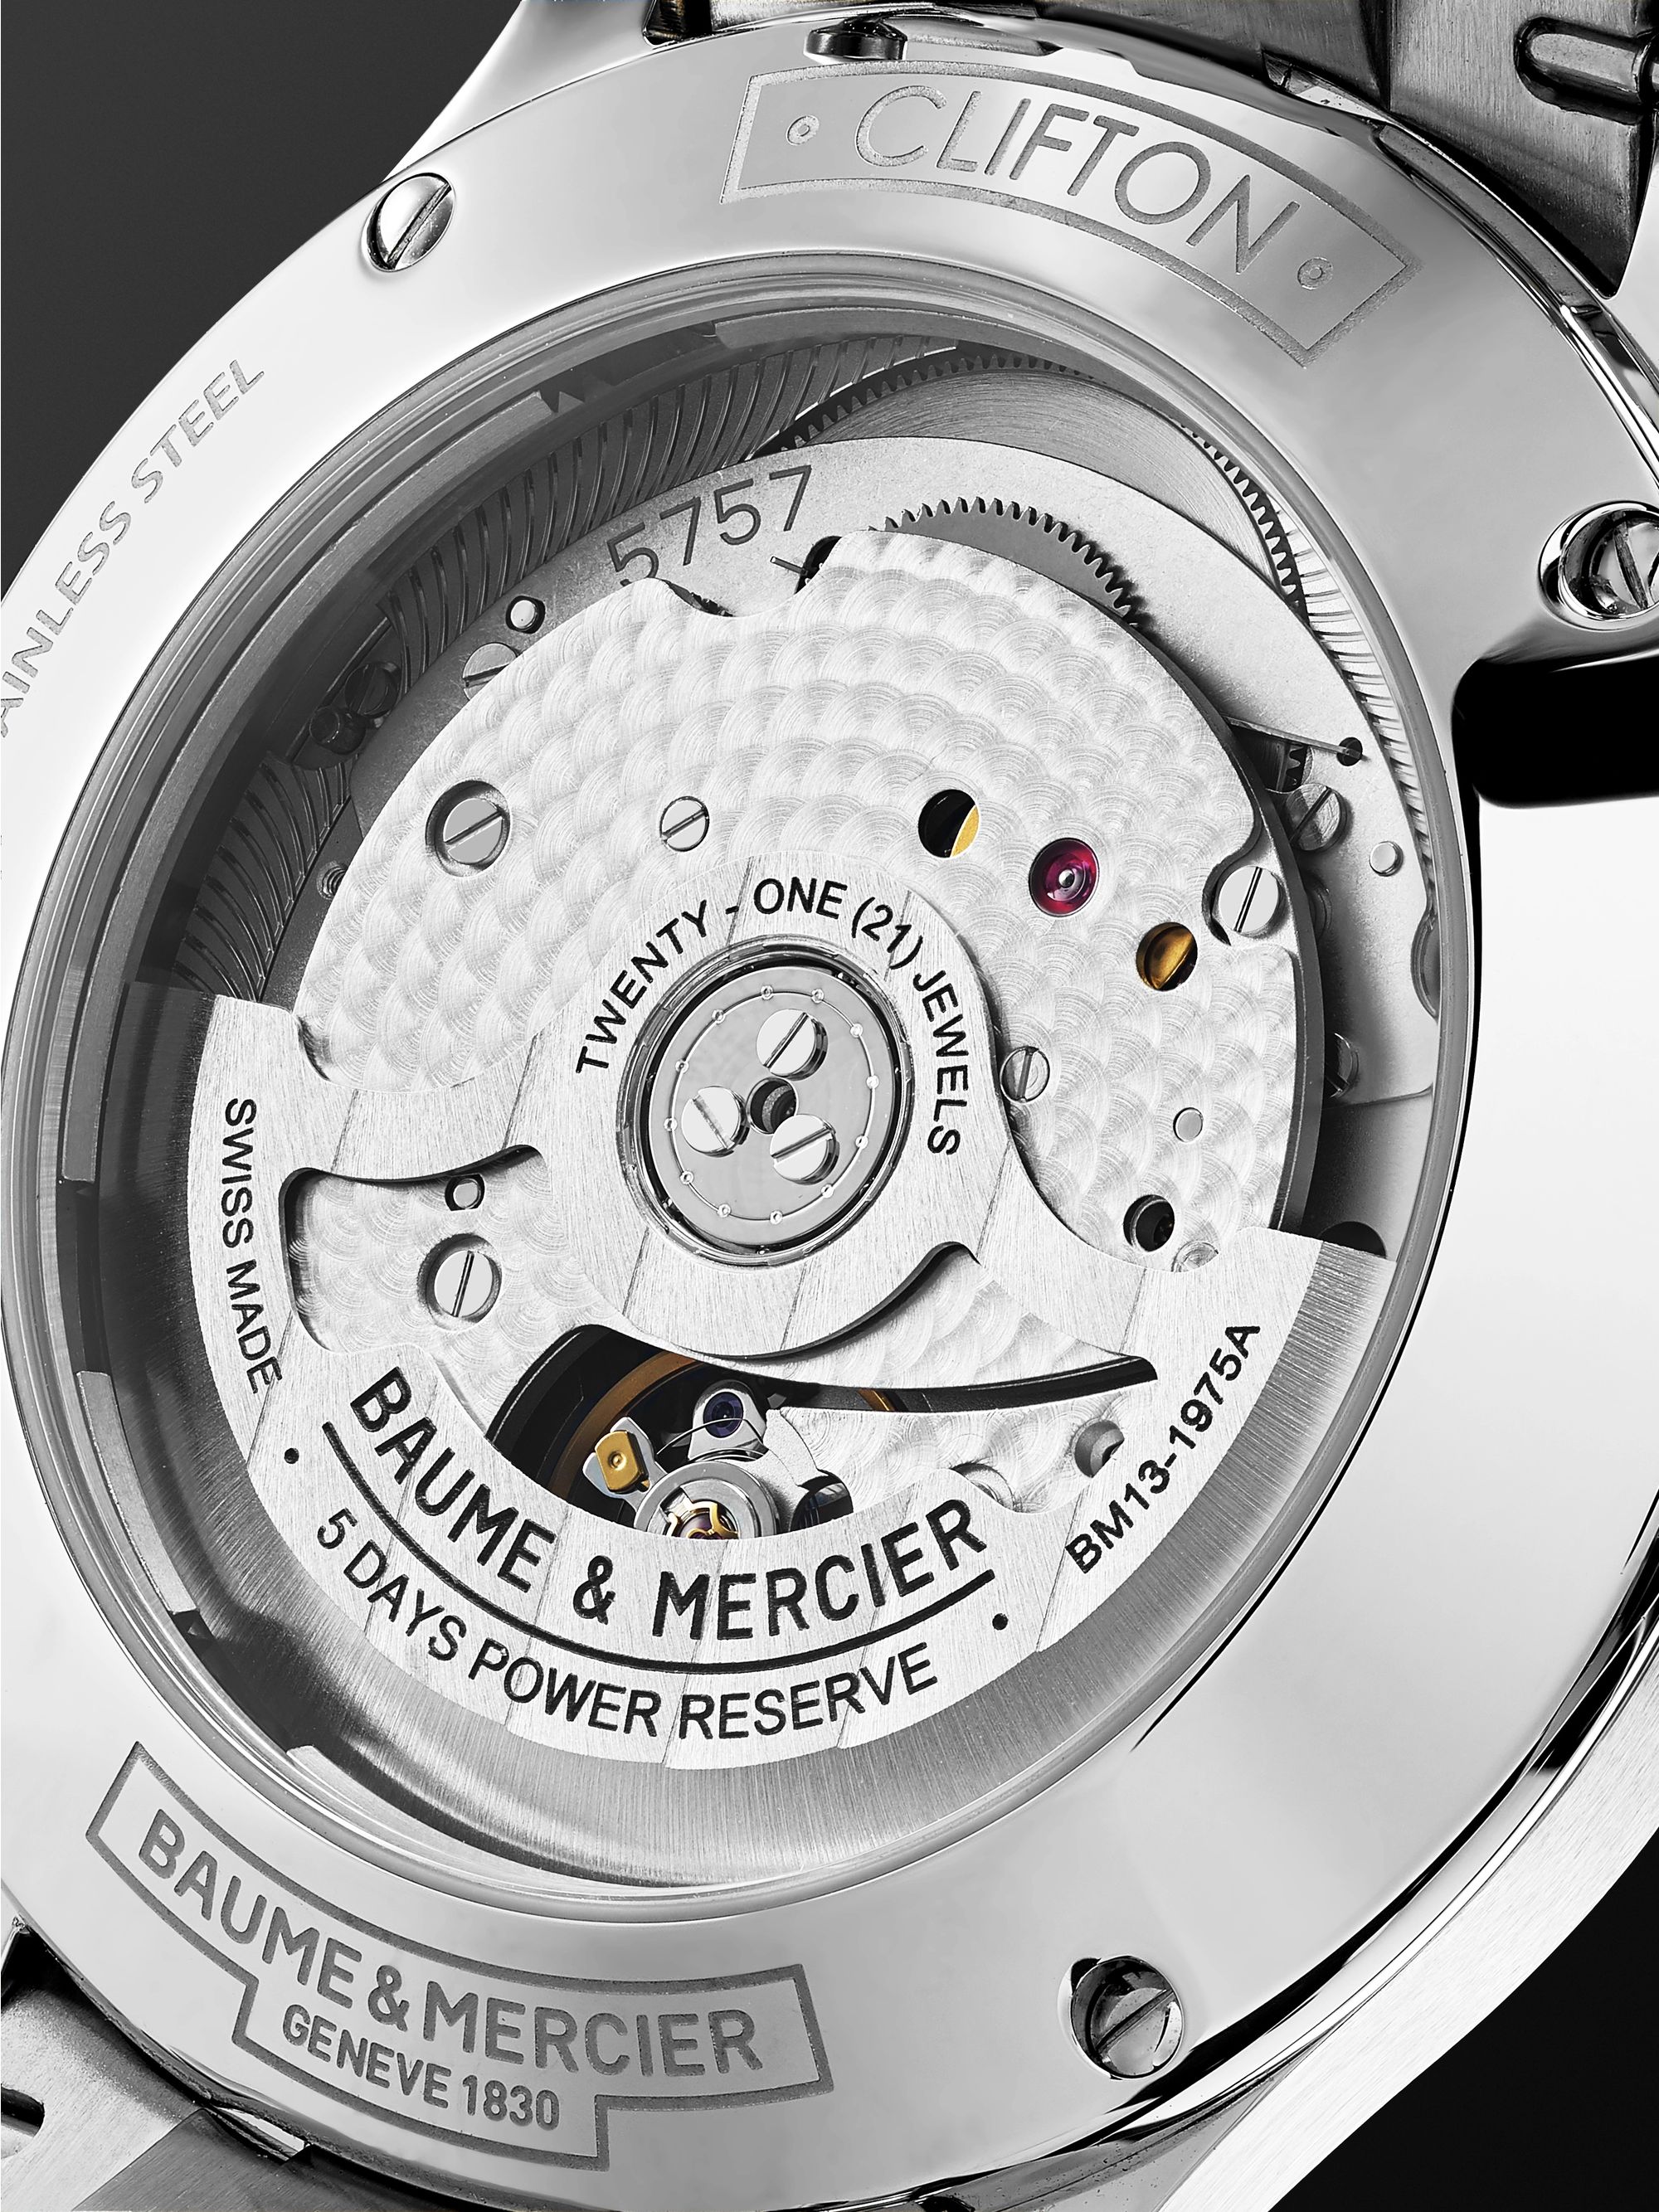 BAUME & MERCIER Clifton Baumatic Automatic Chronometer 40mm Stainless Steel Watch, Ref. No. M0A10551